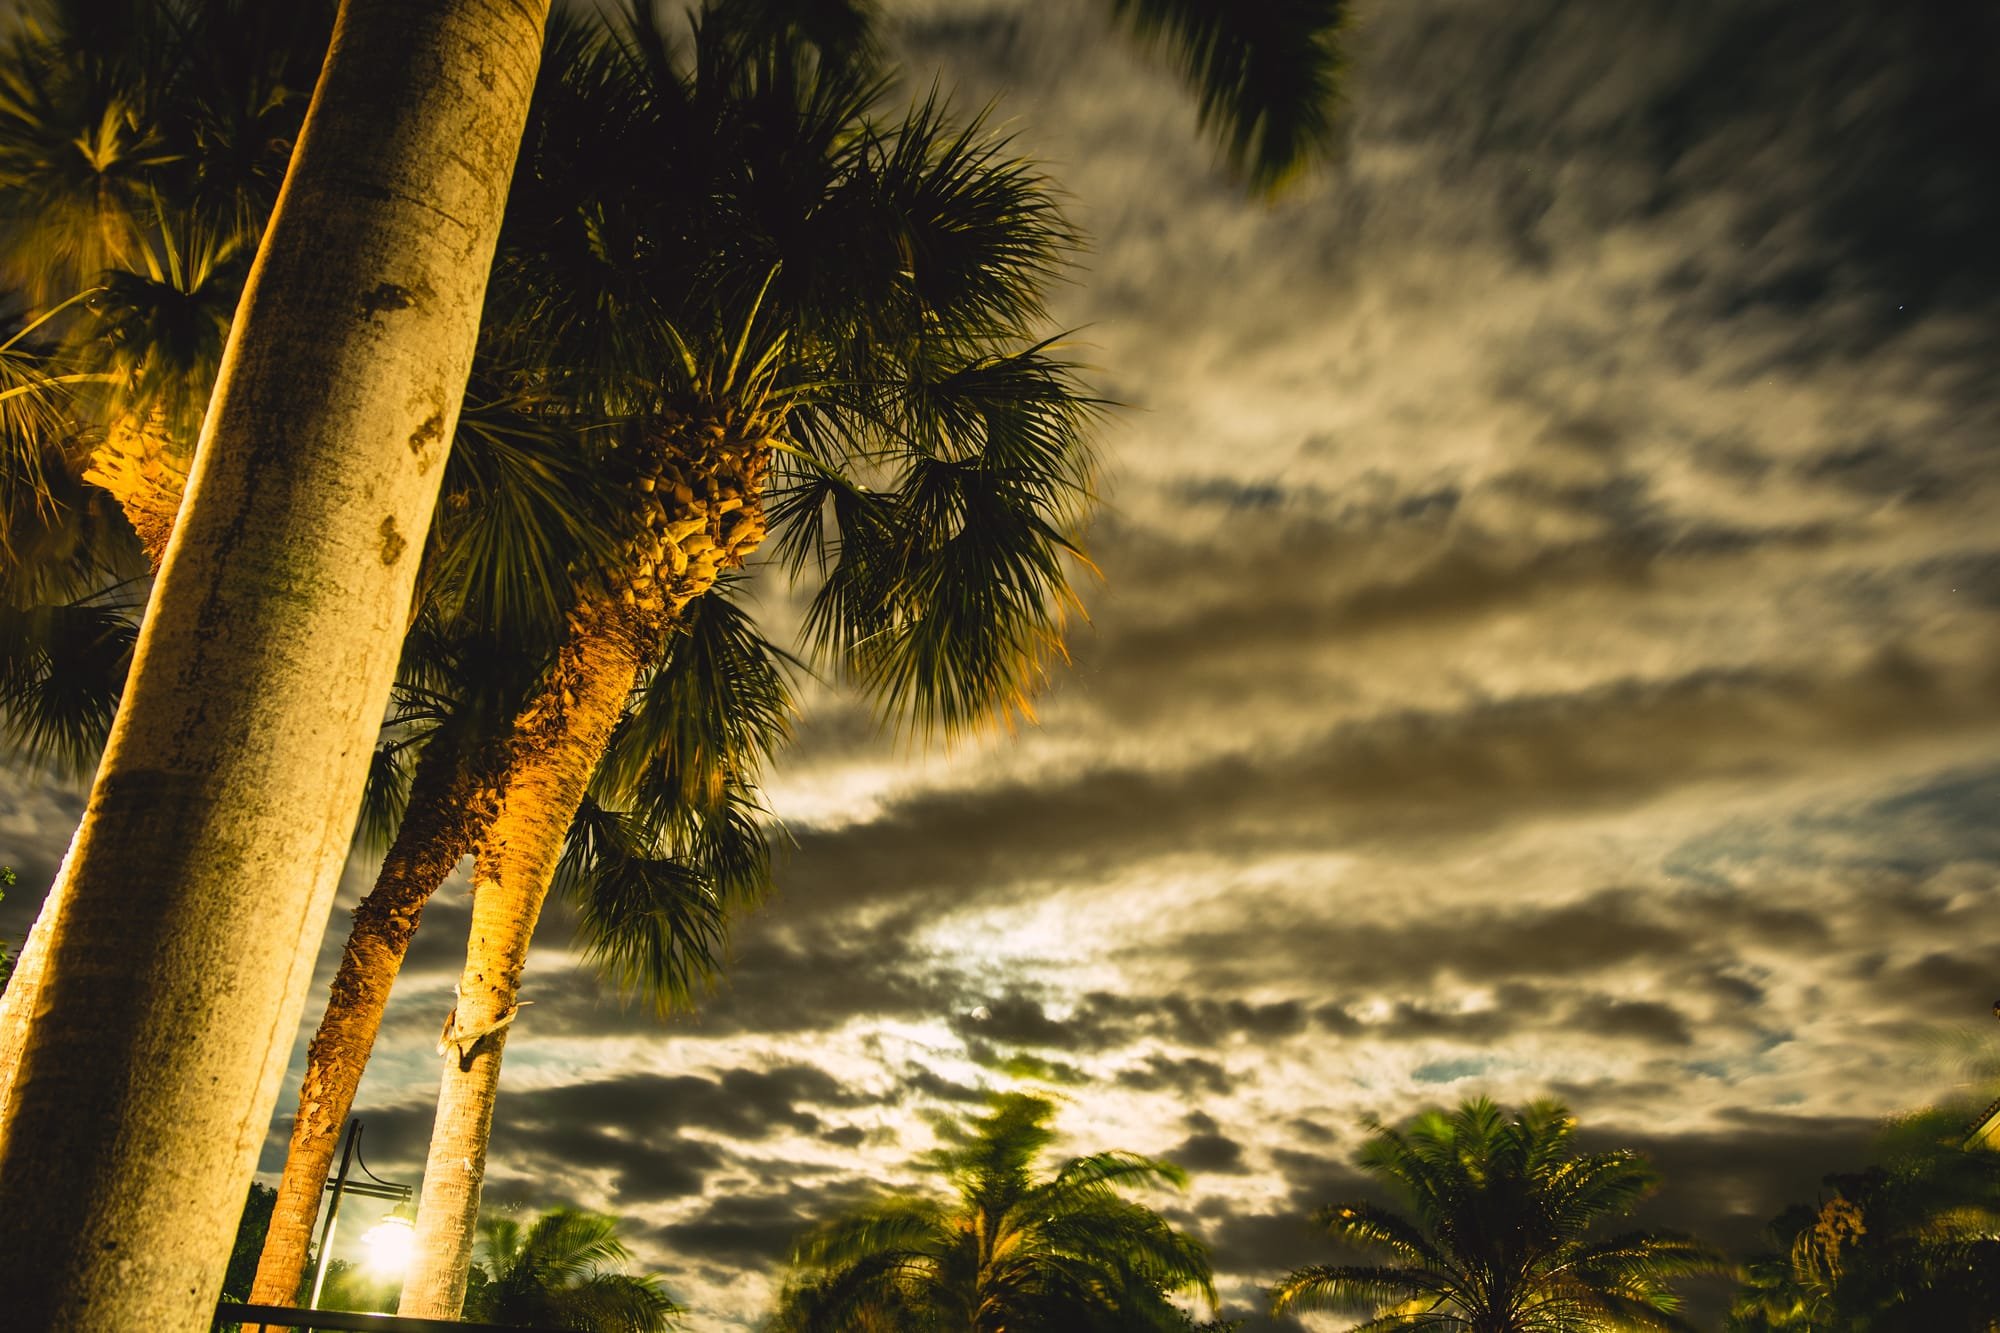 PALM TREES IN SUNSET | MARCO ISLAND, FL